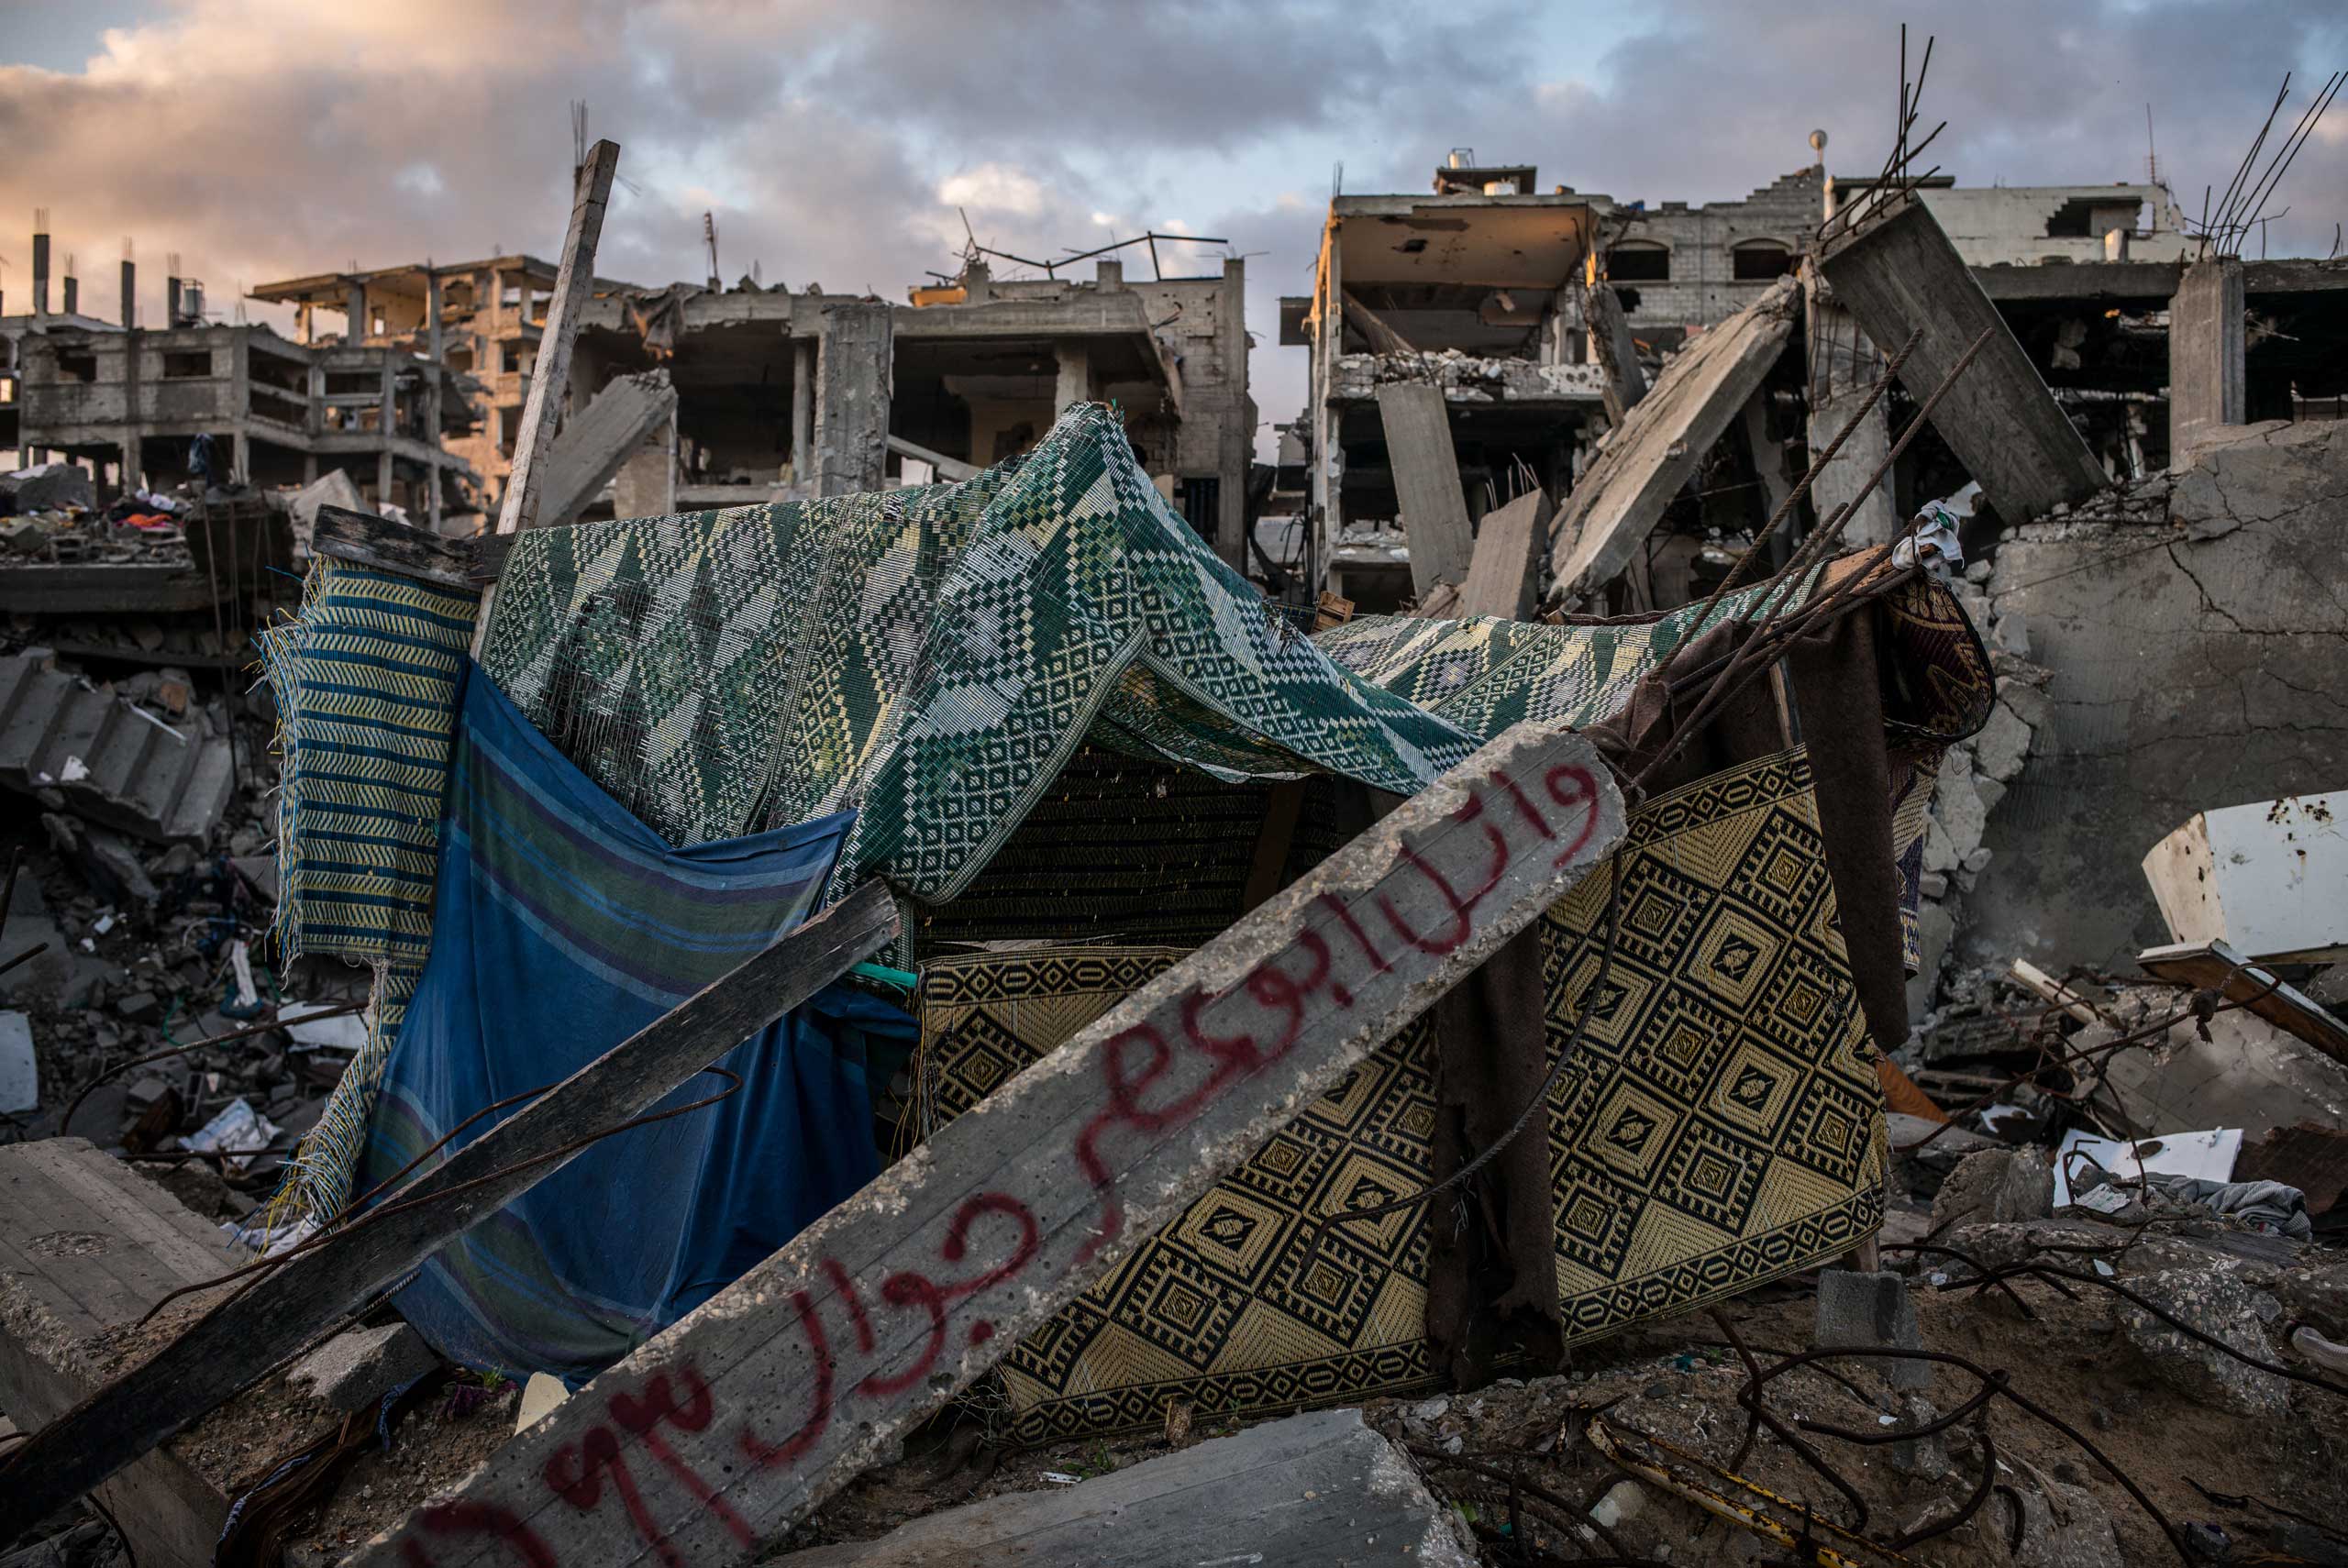 A destroyed building in Shejaiya, Gaza. Families have written their names on the rumbles that once were their homes. The Gaza Strip. December 2014.